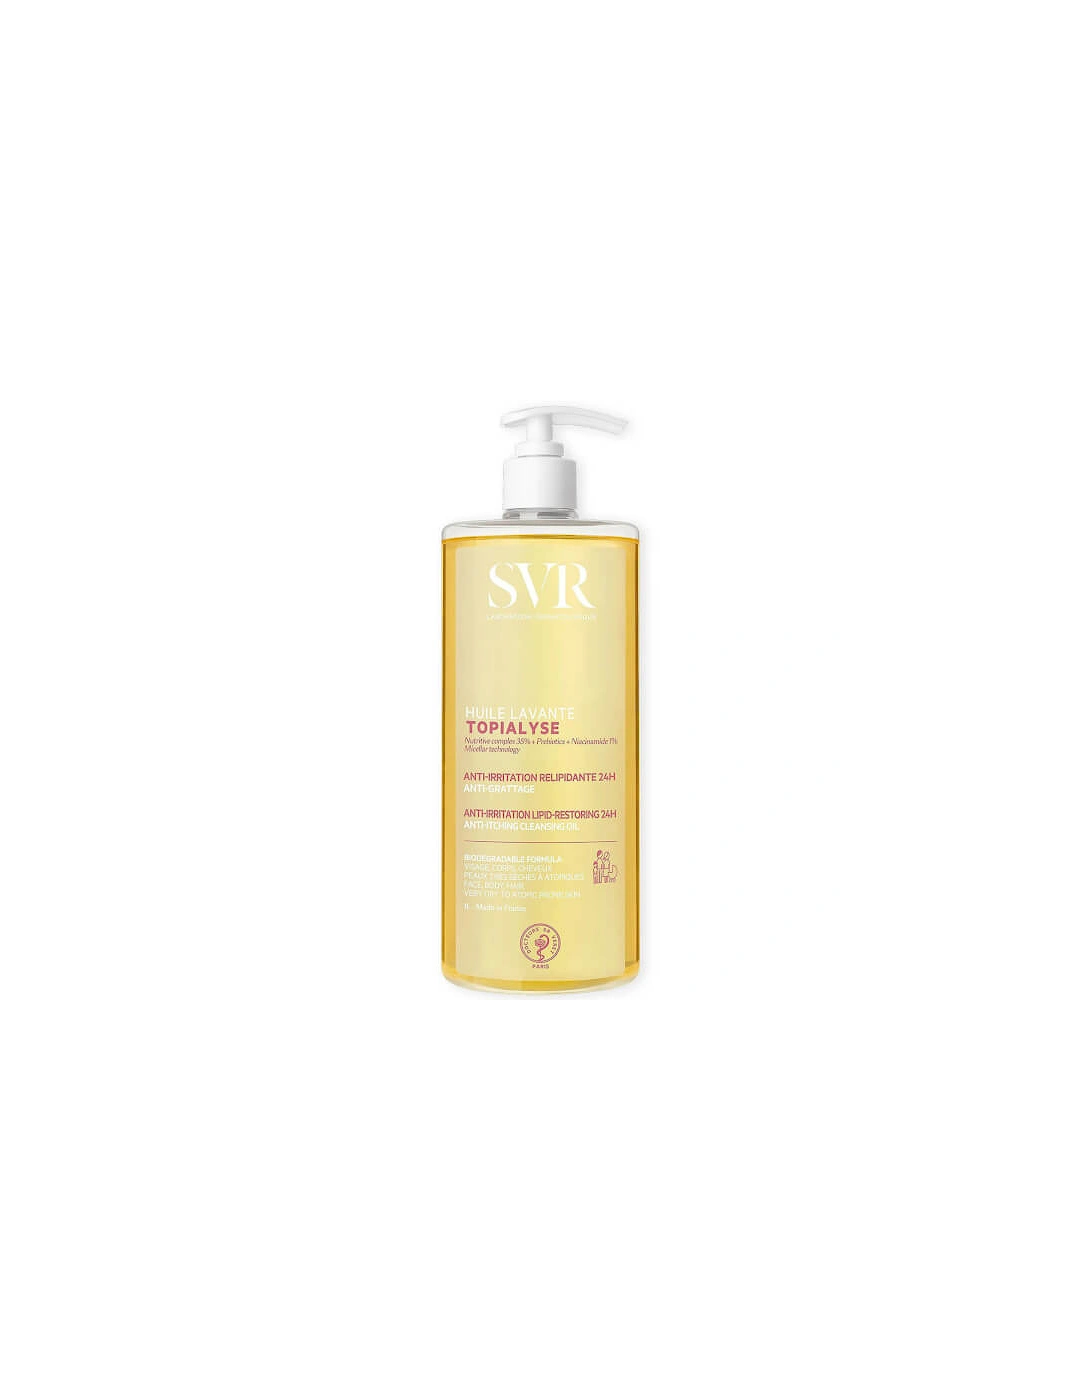 SVR Topialyse Face and Body Emulsifying Micellar Oil Wash 1000ml, 2 of 1